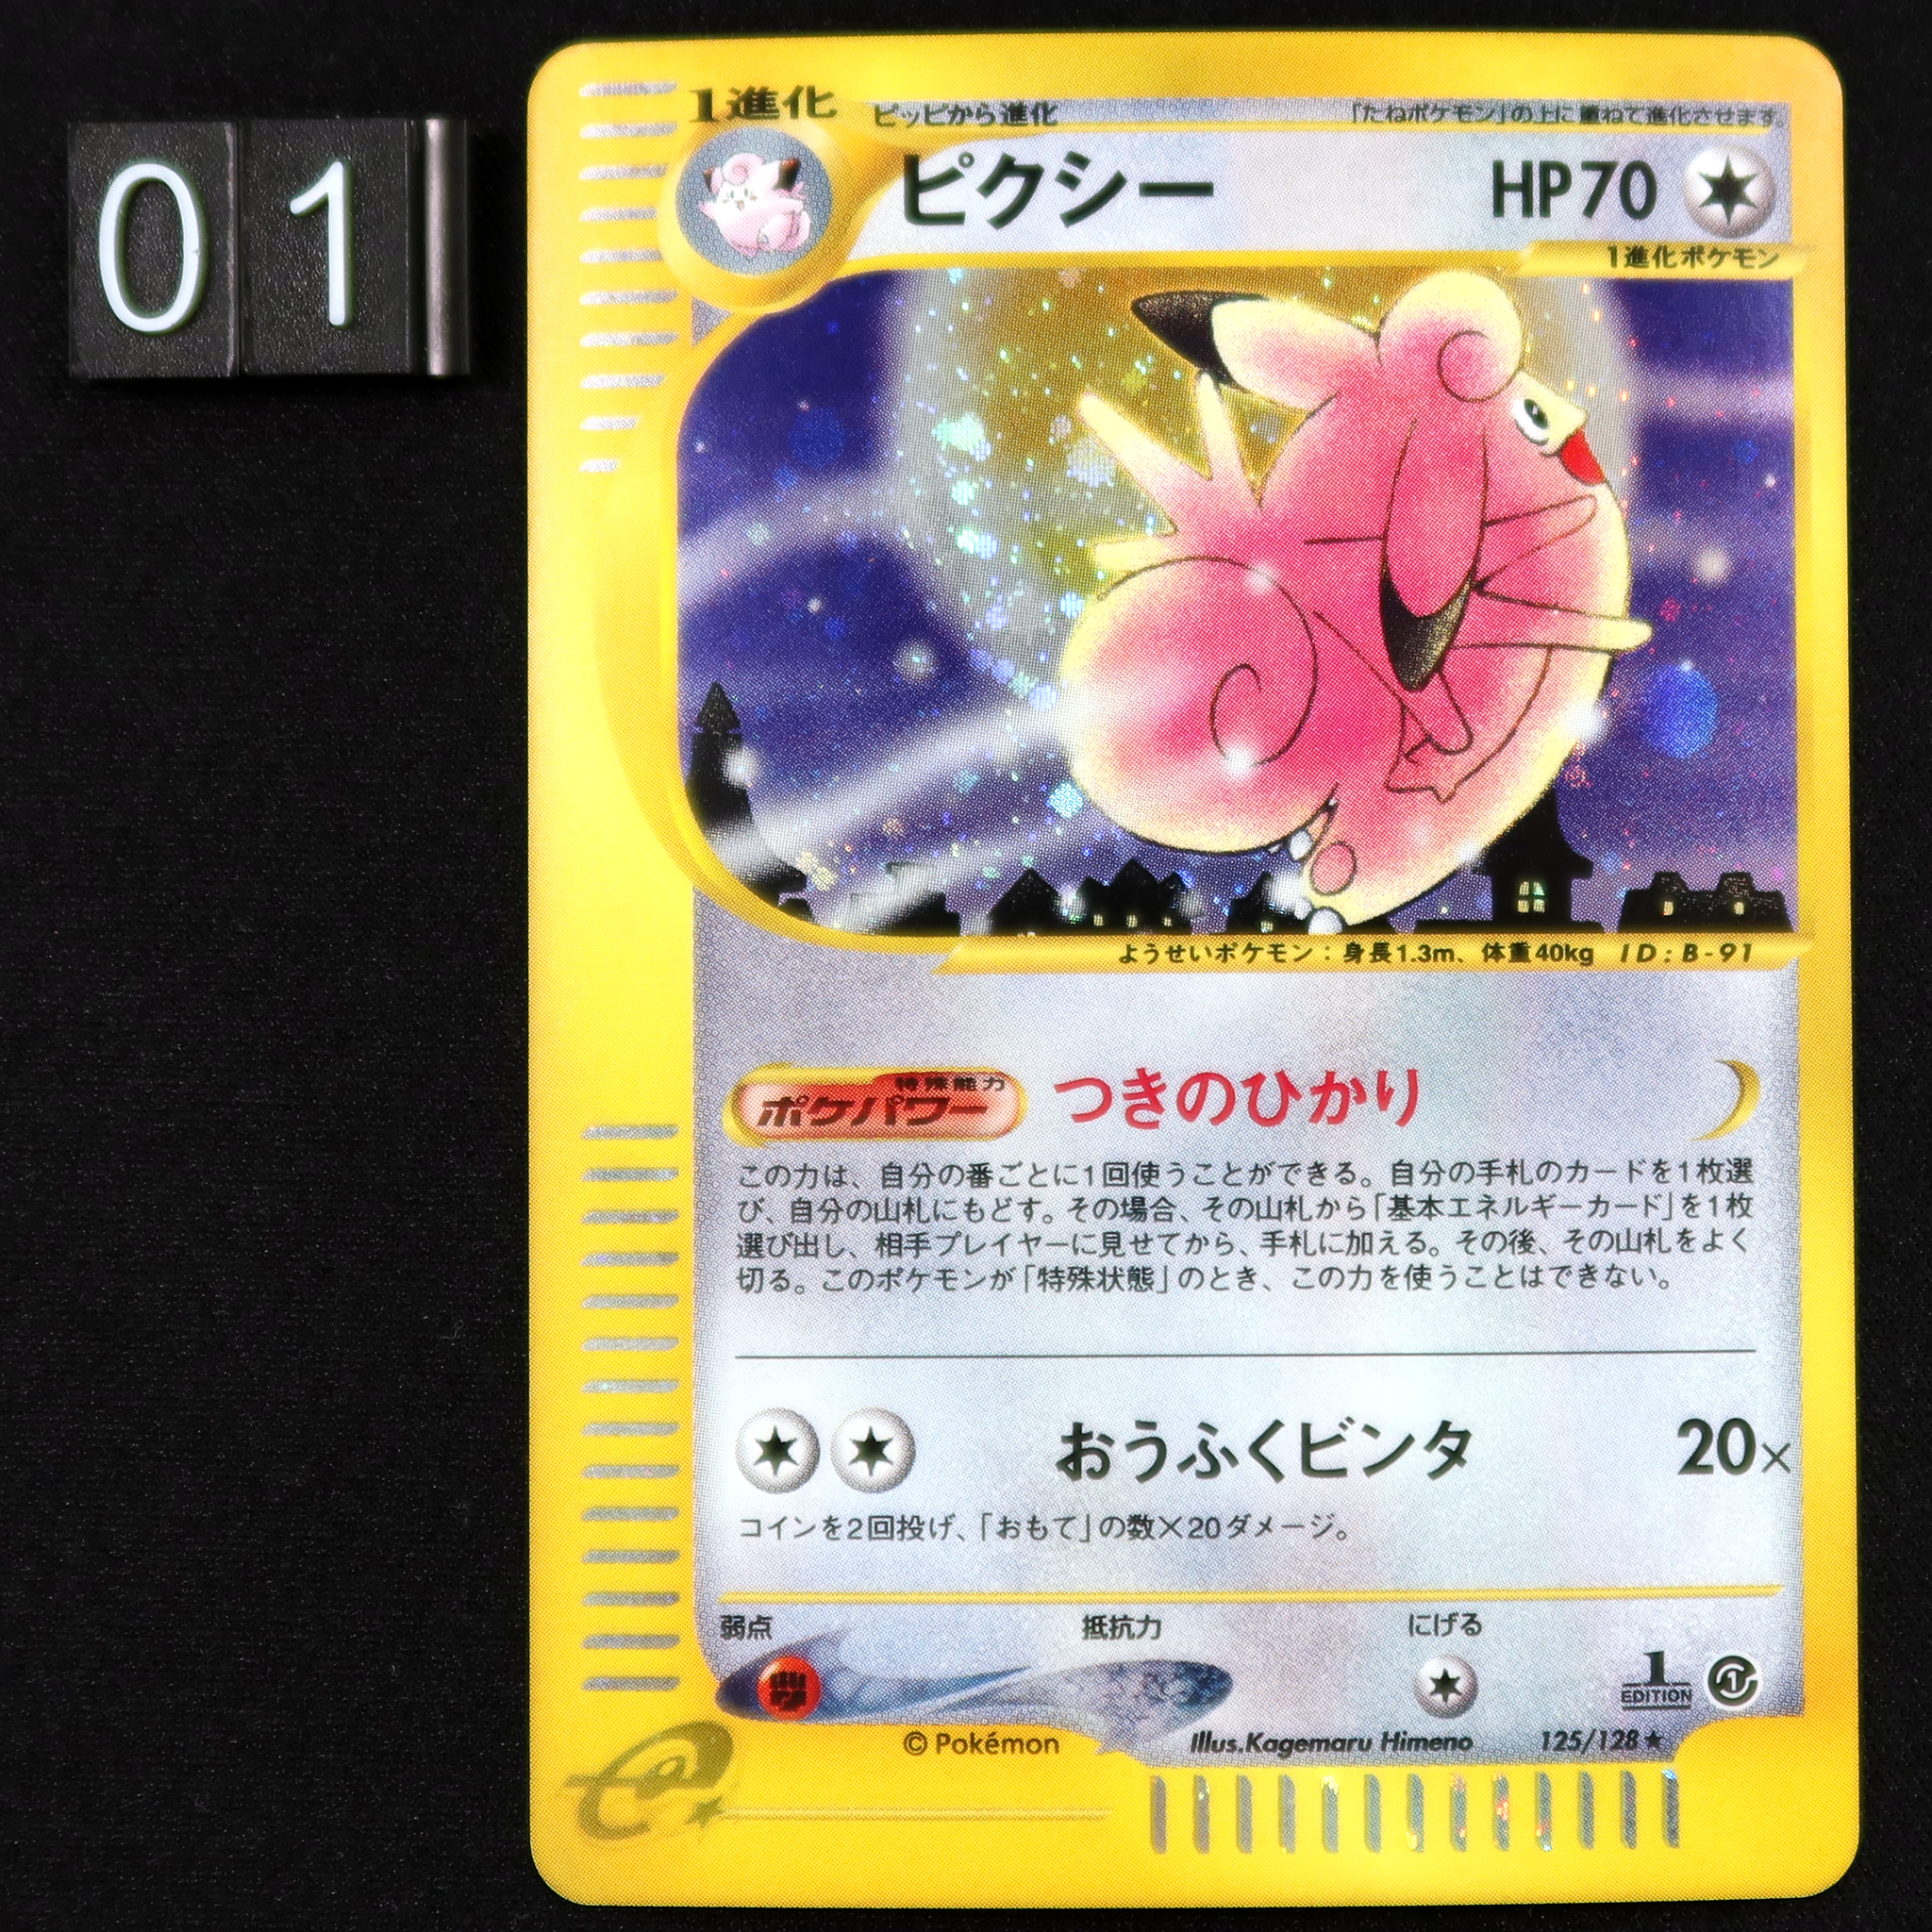 POCKET MONSTERS CARD GAME ｢Expedition｣  POKEMON CARD GAME E SERIE1 125/128 FOIL - Clefable  Clefable foil version  This is an old card with some scratches and white spots. Please check the pictures and contact us if needed.